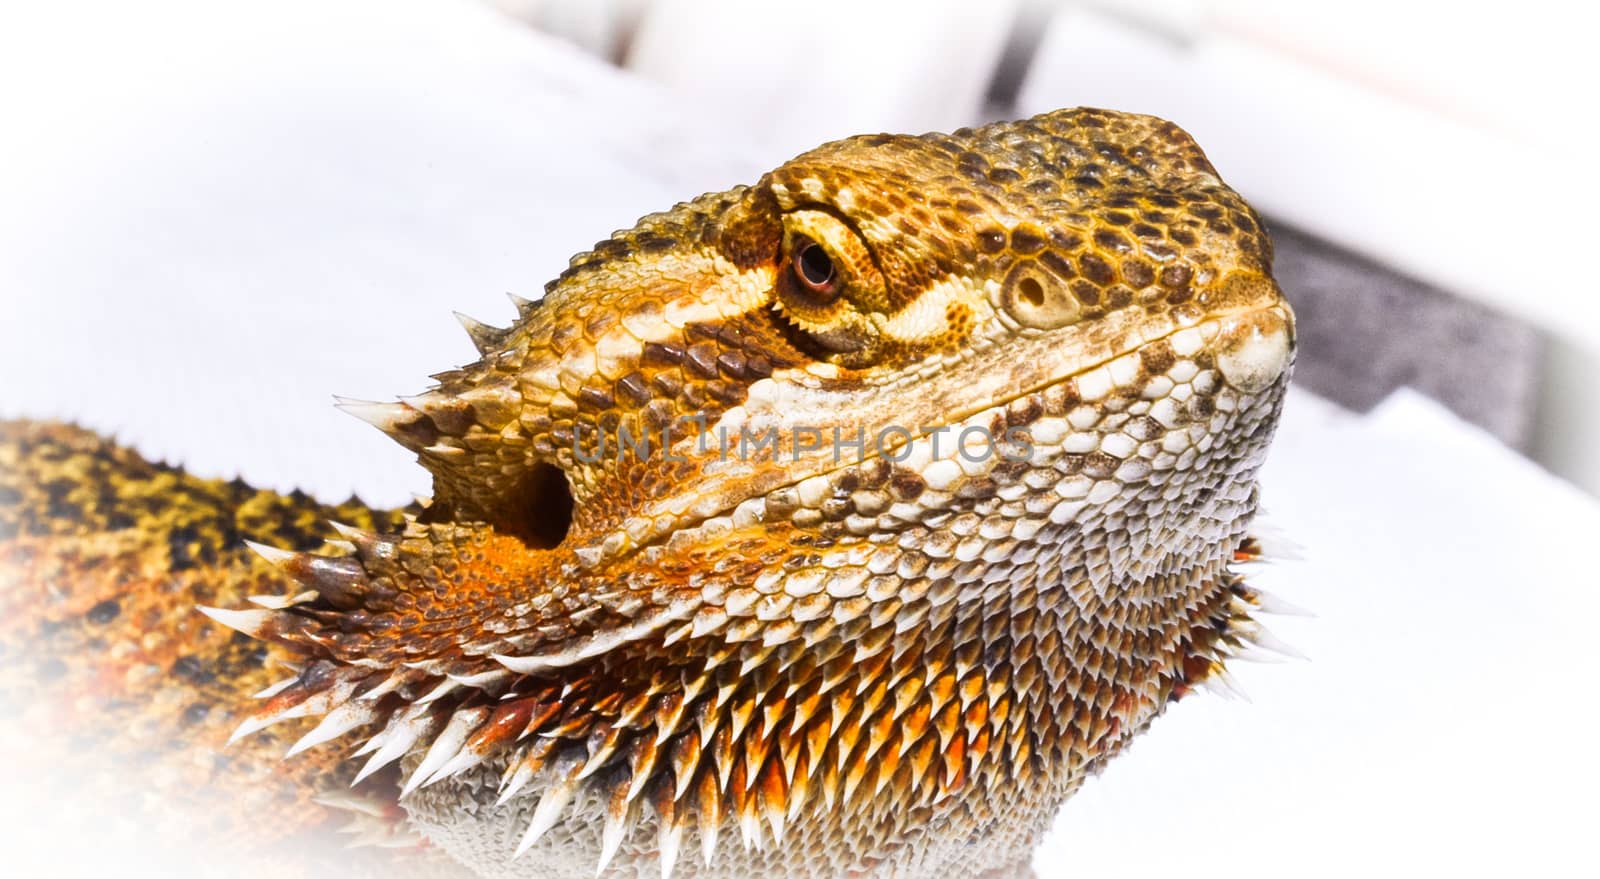 A bearded dragon suns himself on a hot day.  Close up - reptile